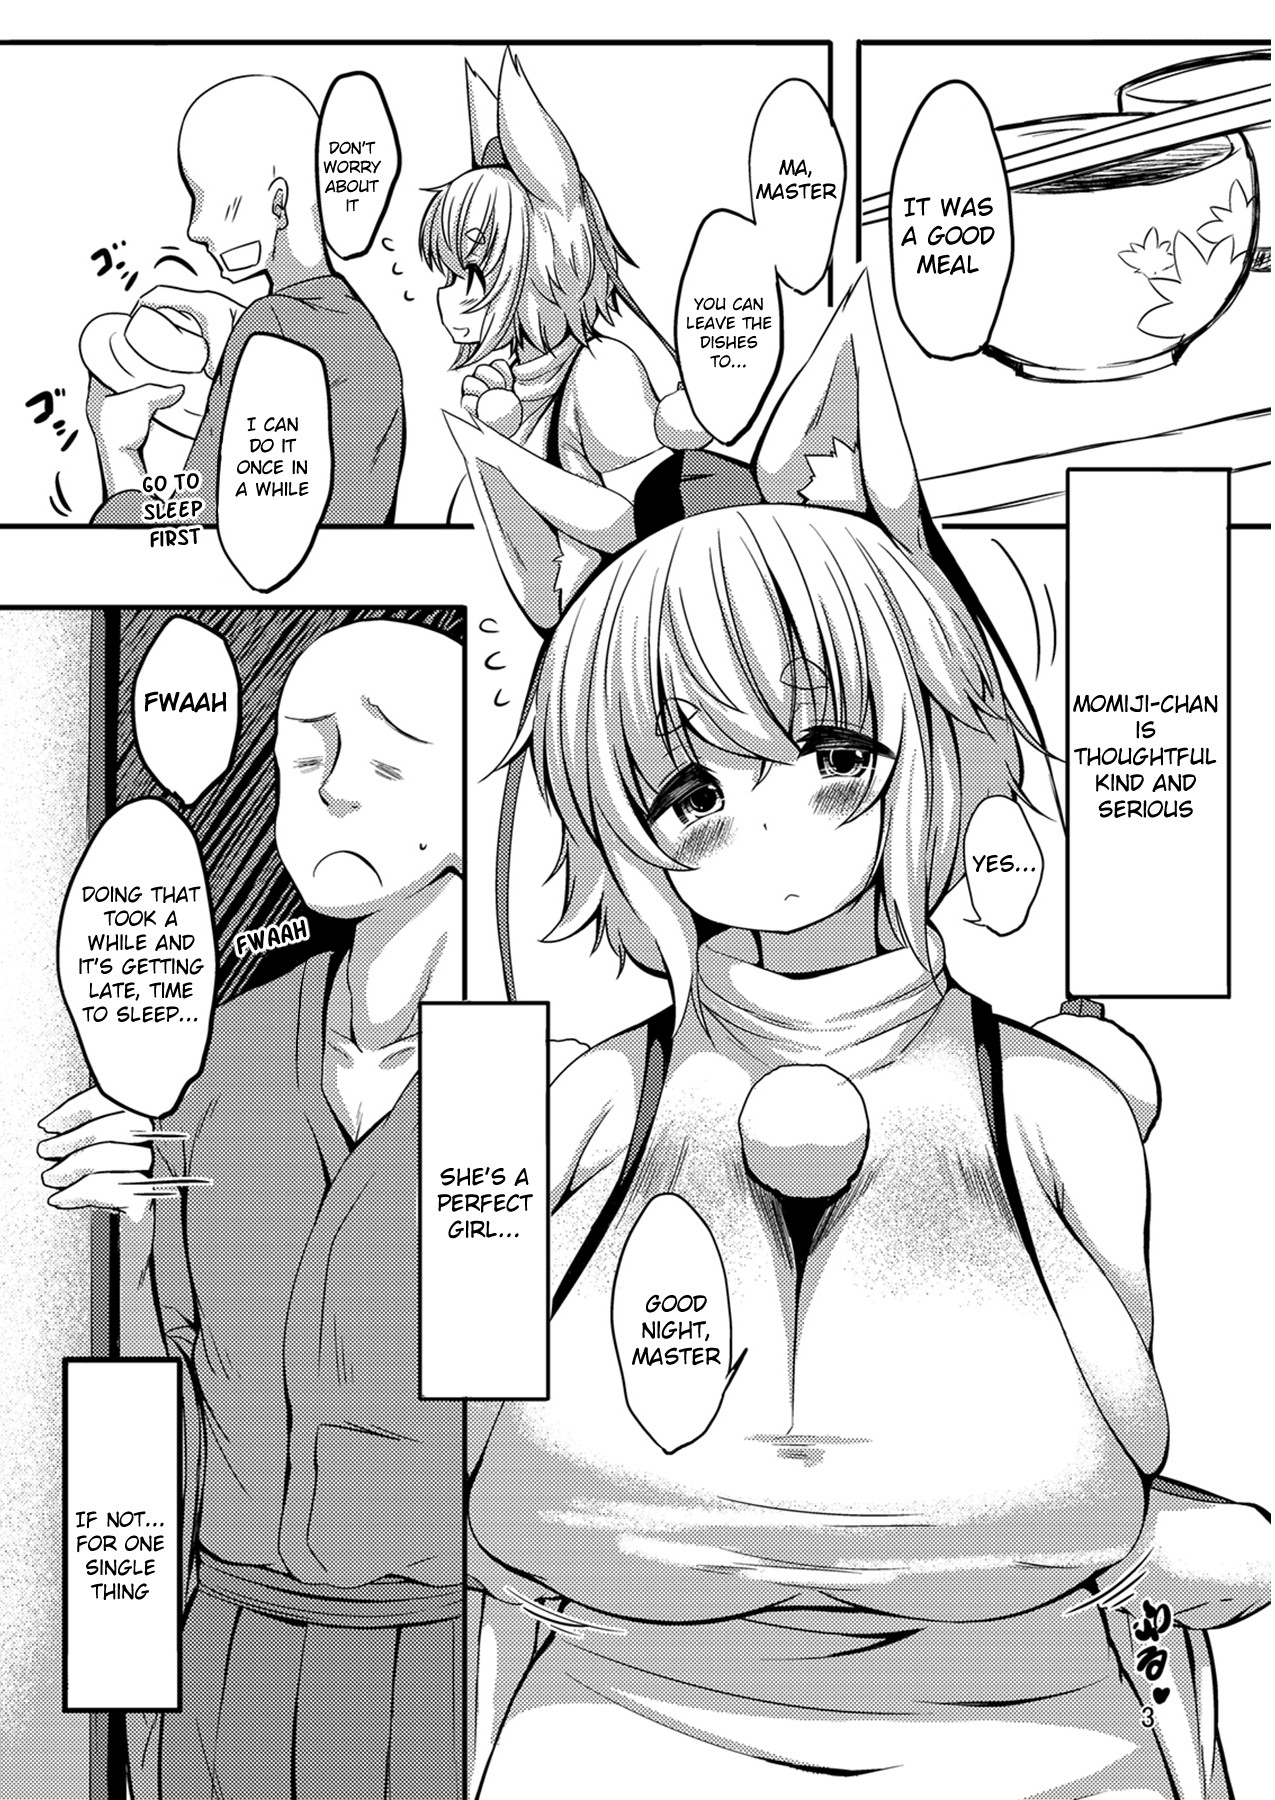 Hentai Manga Comic-A Book About a Sleeping Wolf Girl Whose Ass Looked So Lewd It Made Me Want To User Her As An Onahole-Read-2